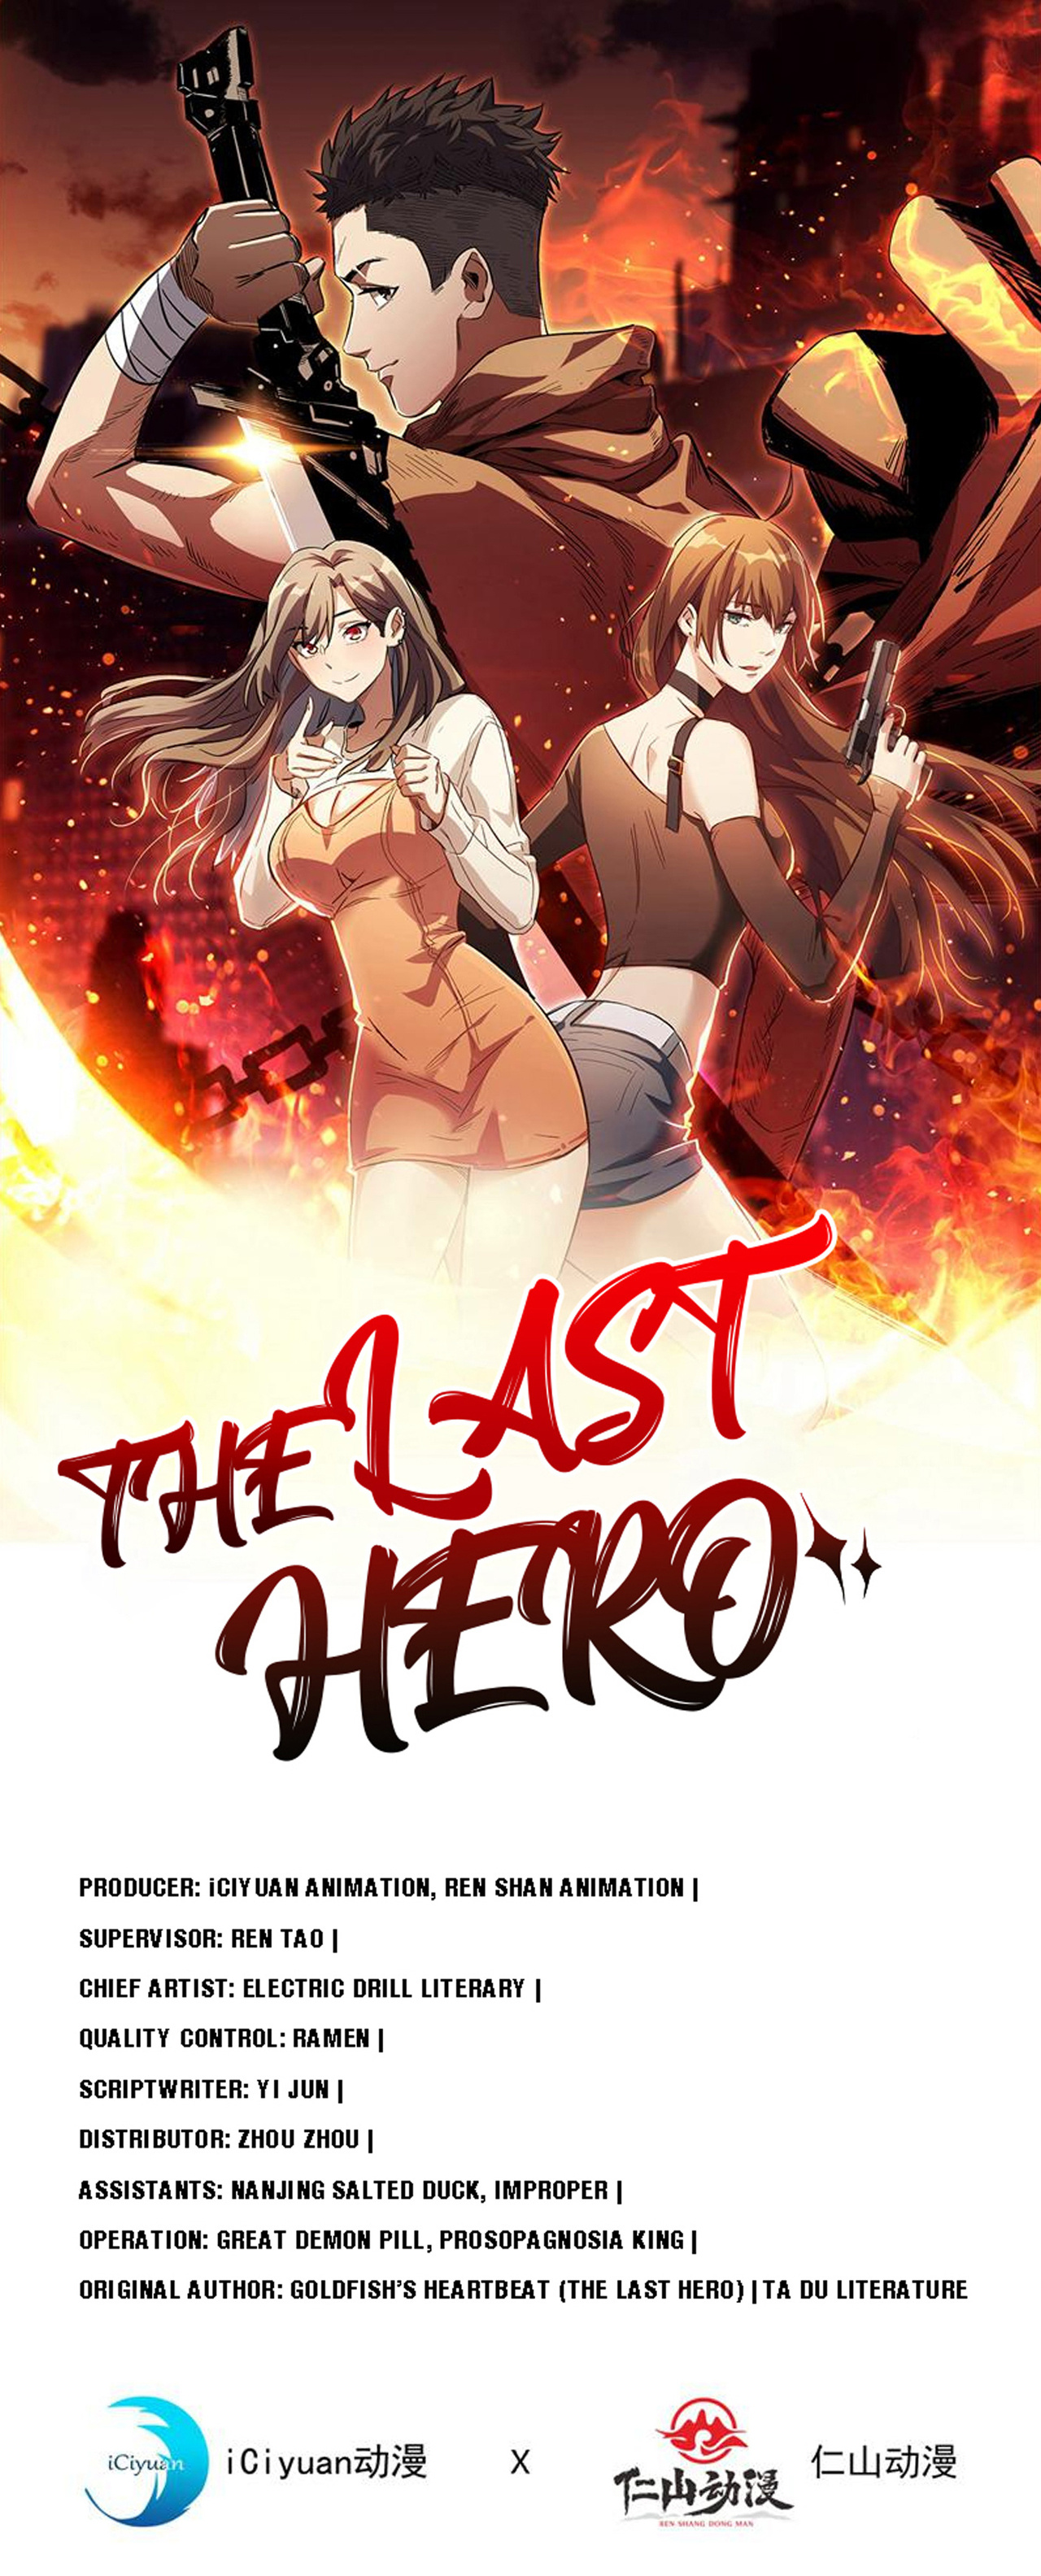 The Last Hero, I Am Picking up Attributes and Items in Last Days 129